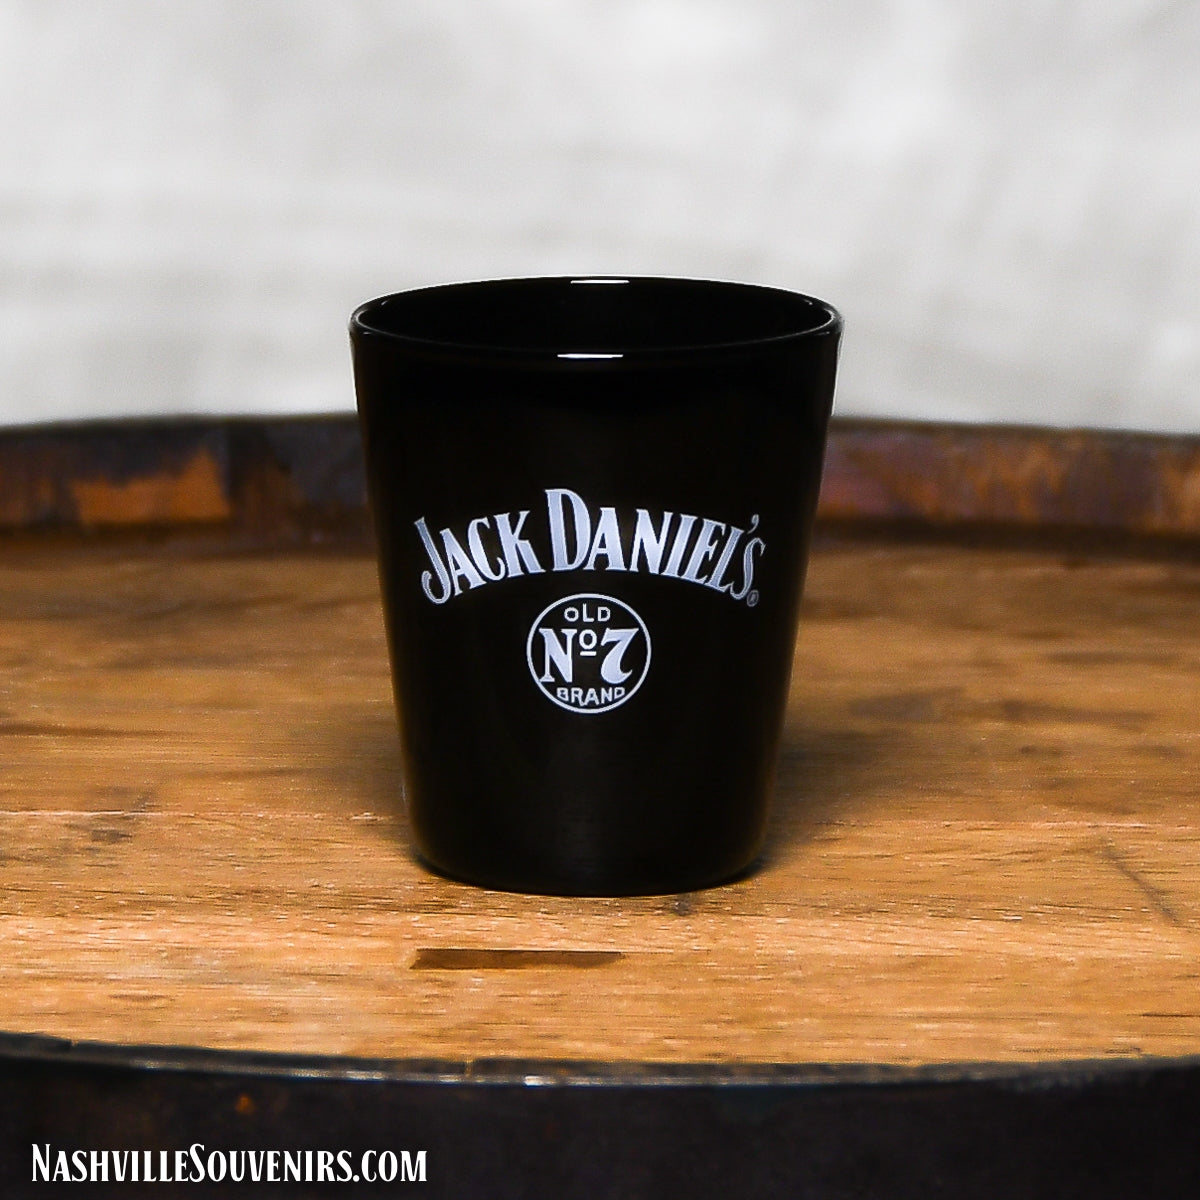 Officially licensed Jack Daniels Black Shotglass with White Label. FREE SHIPPING on all US orders over $75!